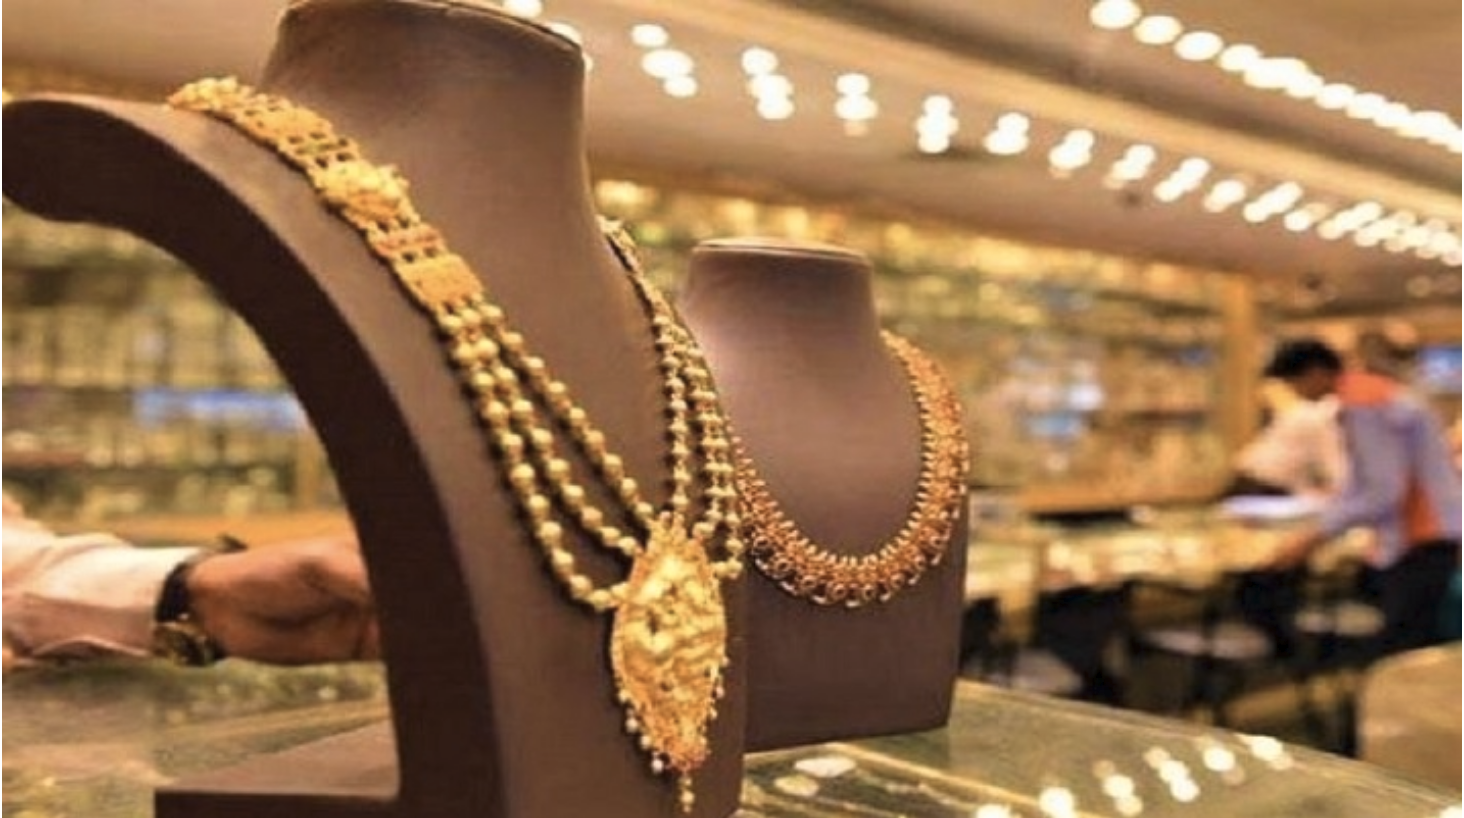 NRIs in UAE: How much gold jewellery can you carry to India?